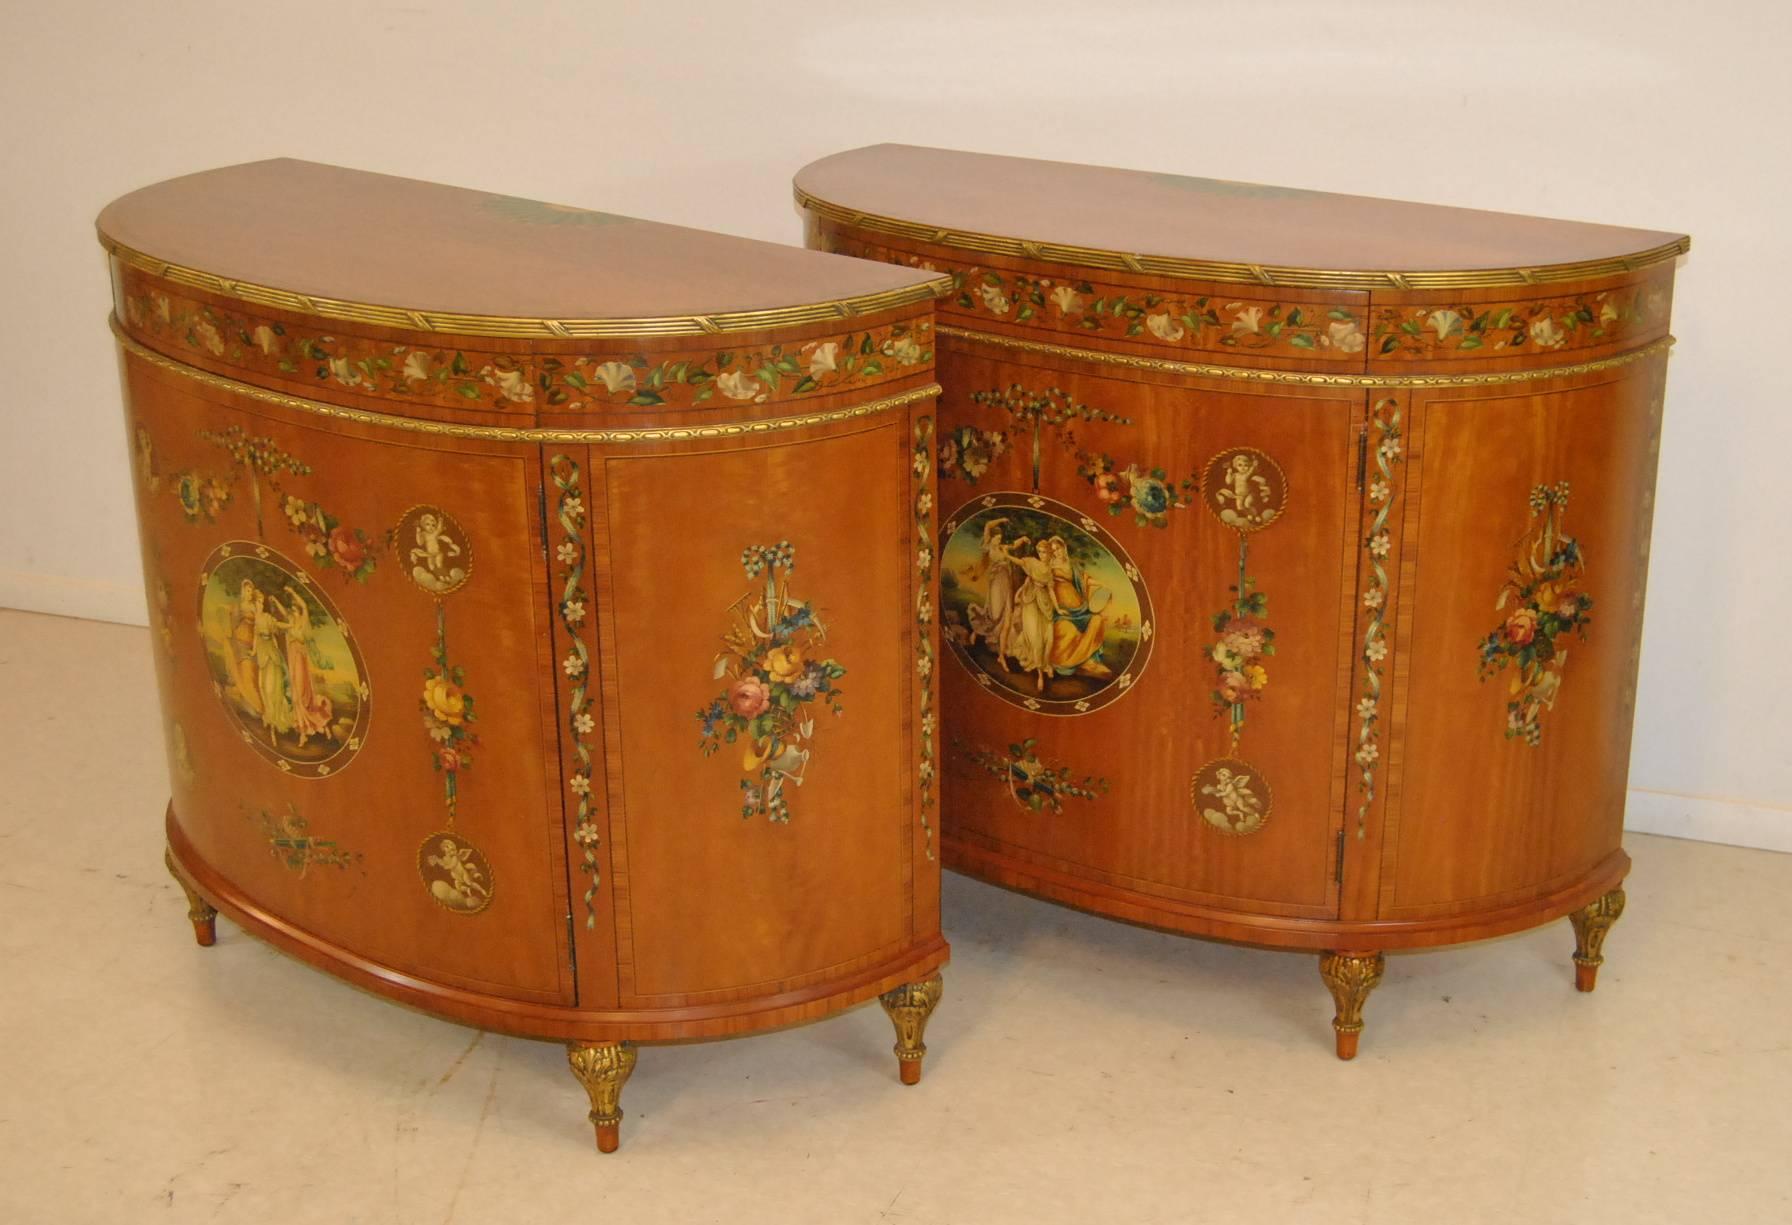 A gorgeous pair of Satinwood French Adam style commodes by Irwin Furniture, circa 1937. Sure to add style and elegance to any room in your home. These stunning commodes feature delicately hand-painted winged cherubs and fair maidens, one drawer that